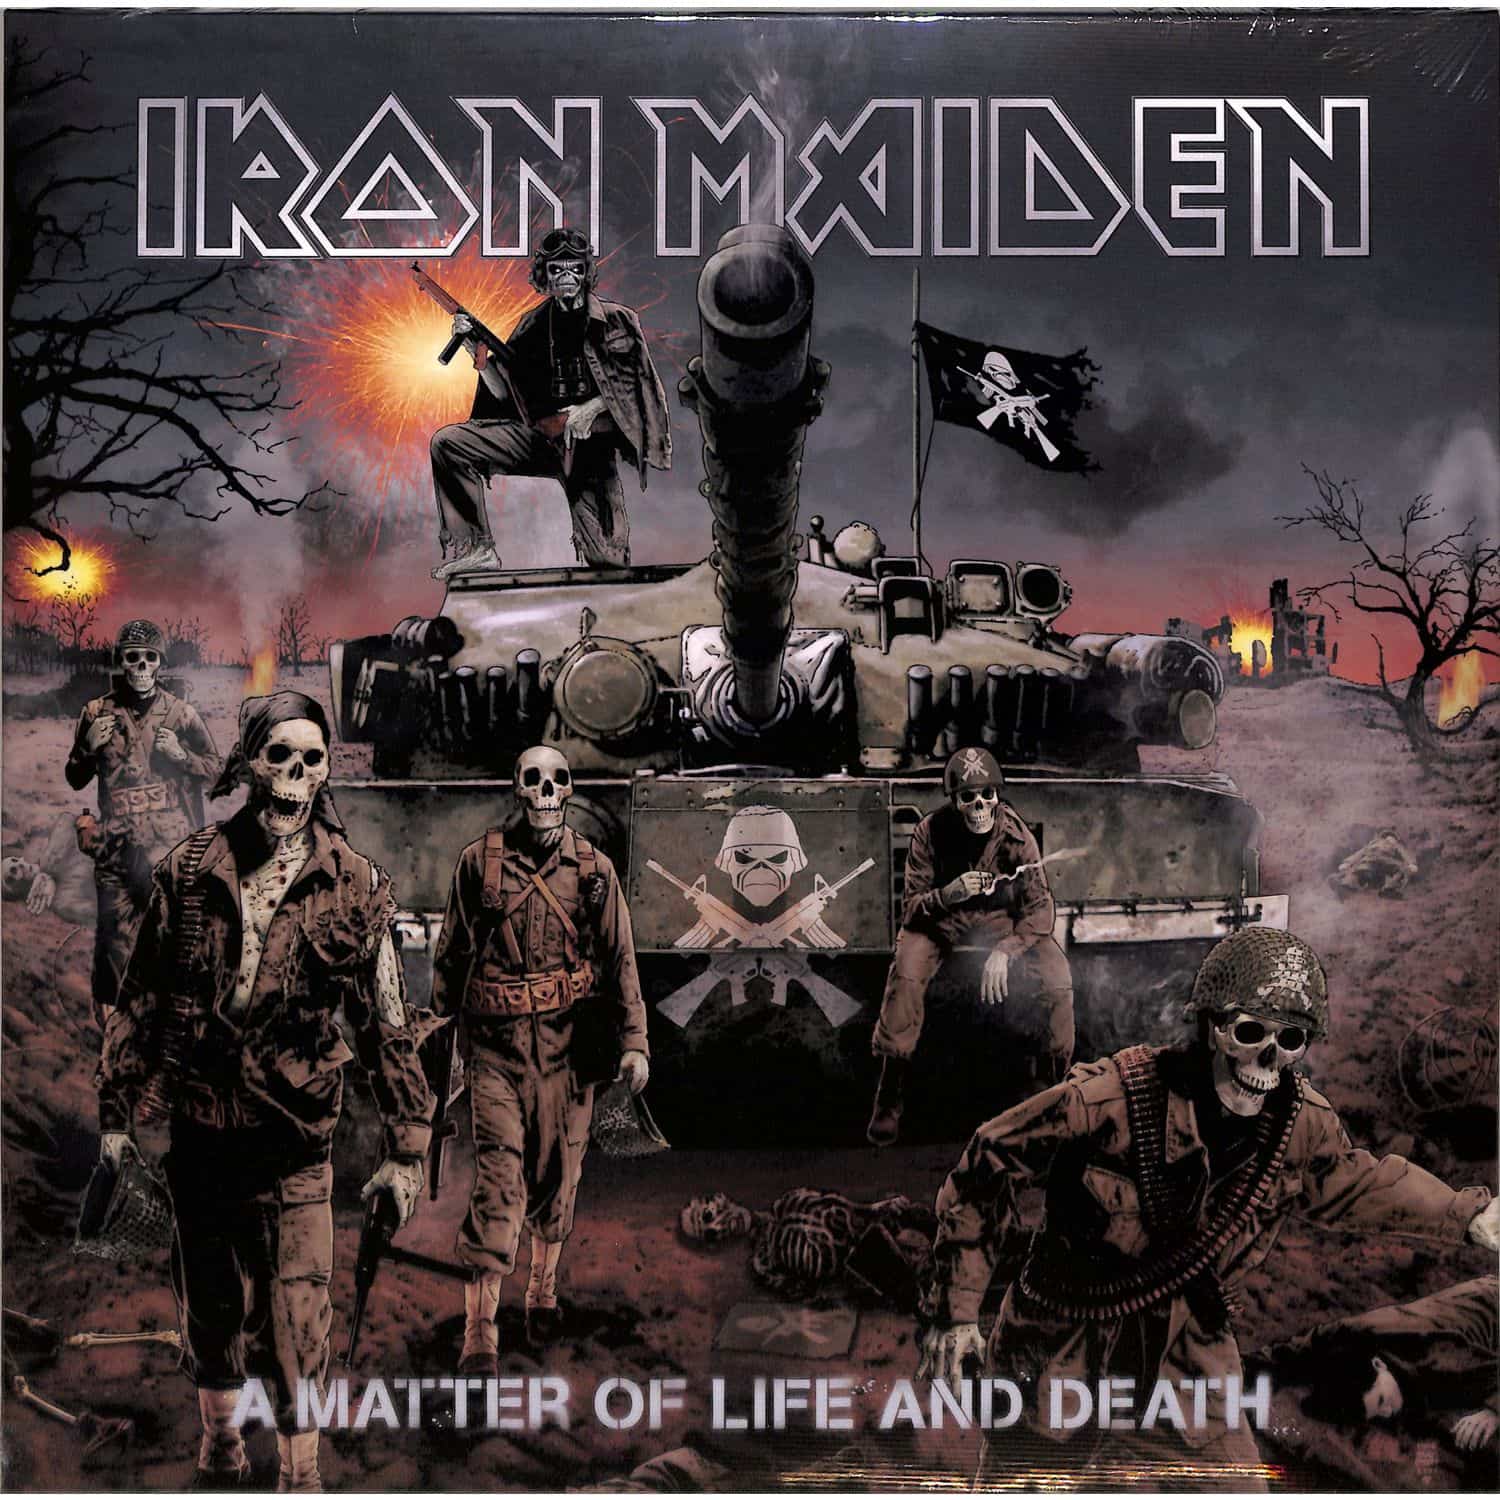 Iron Maiden - A MATTER OF LIFE AND DEATH 